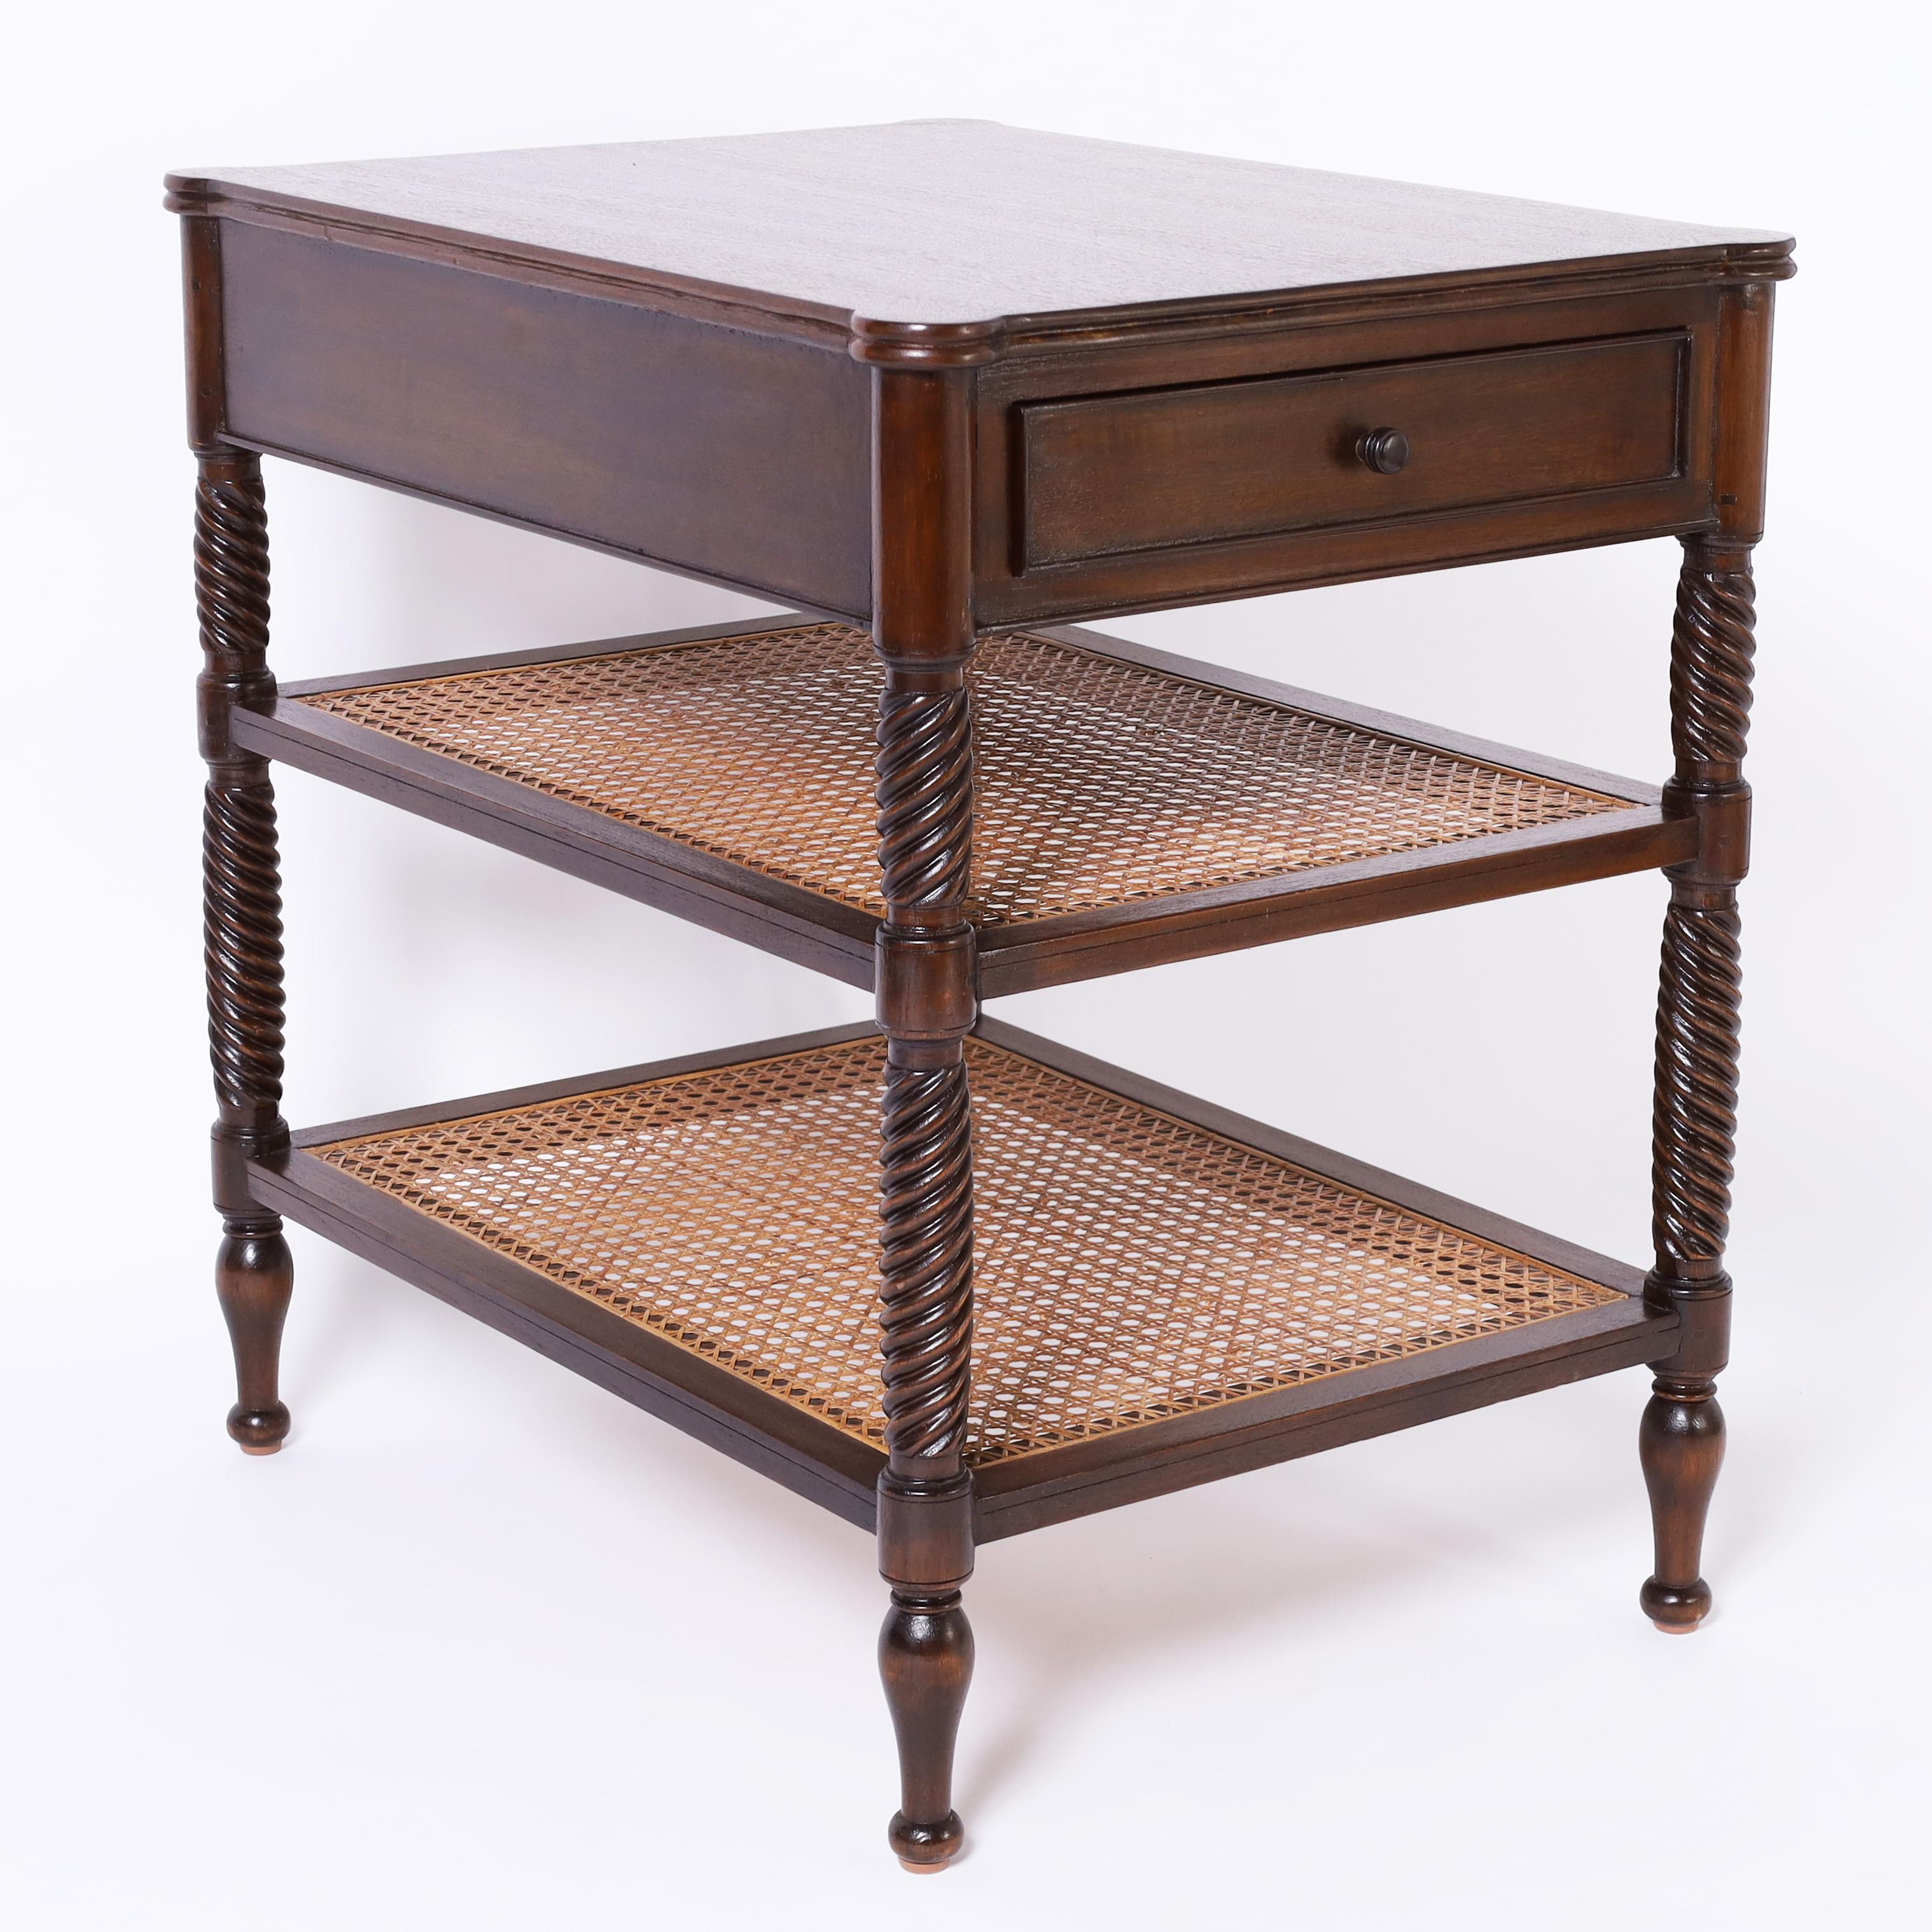 English British Colonial Style Three Tiered Caned Stand or Table For Sale